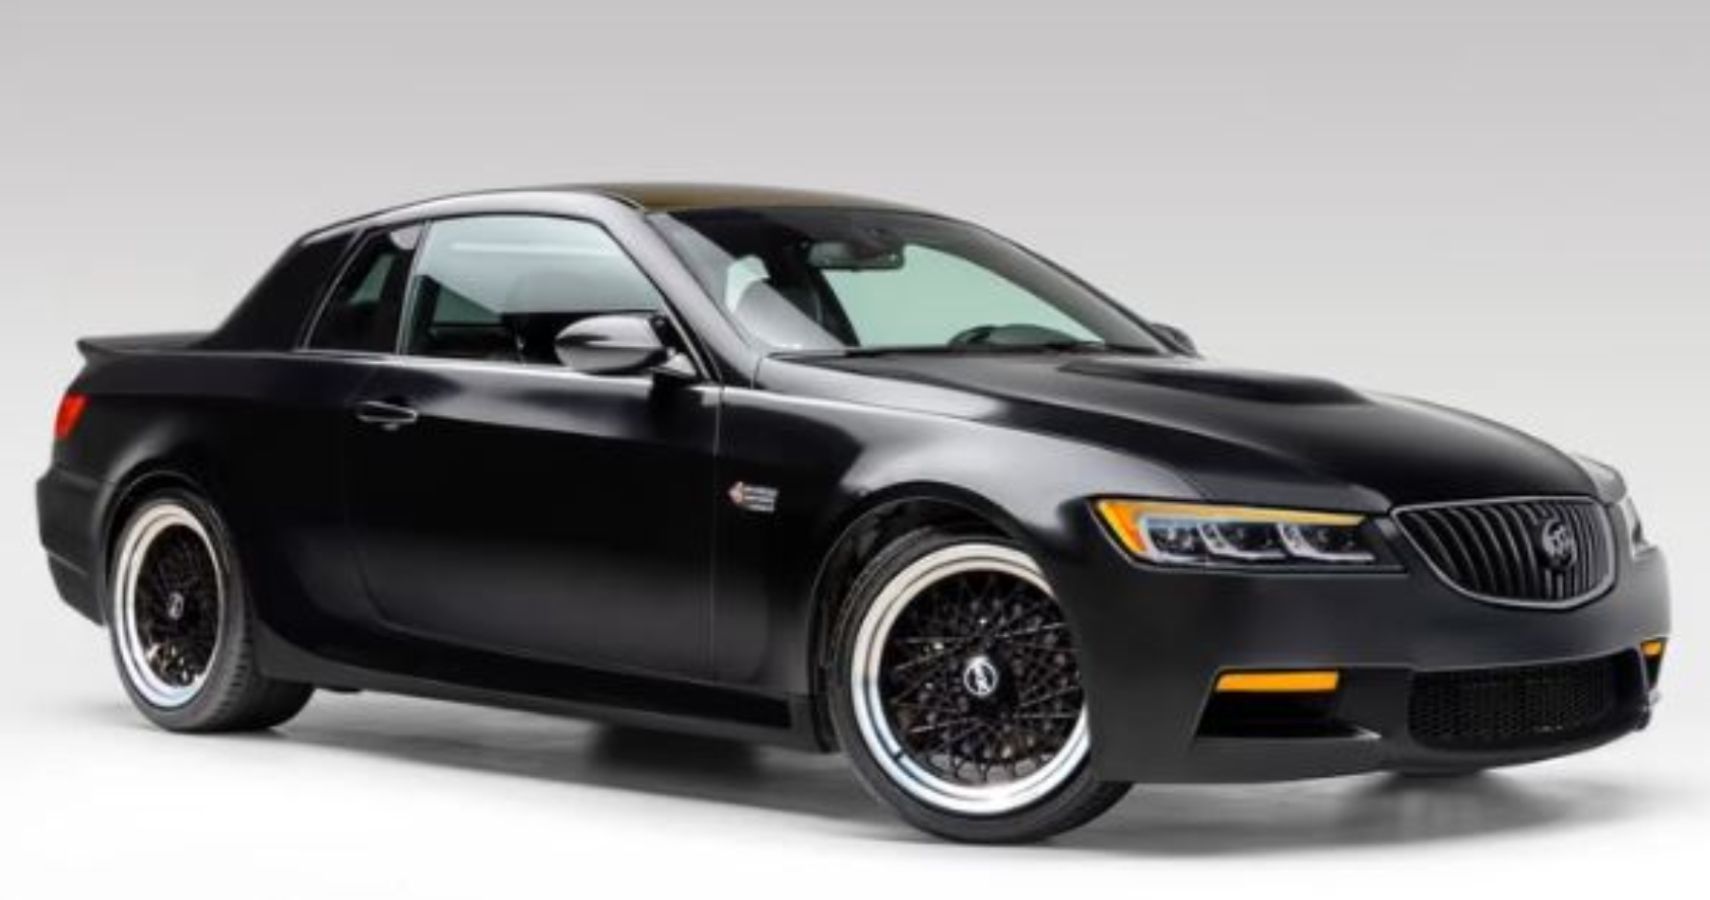 Stretching The Imagination With This New Buick Grand National